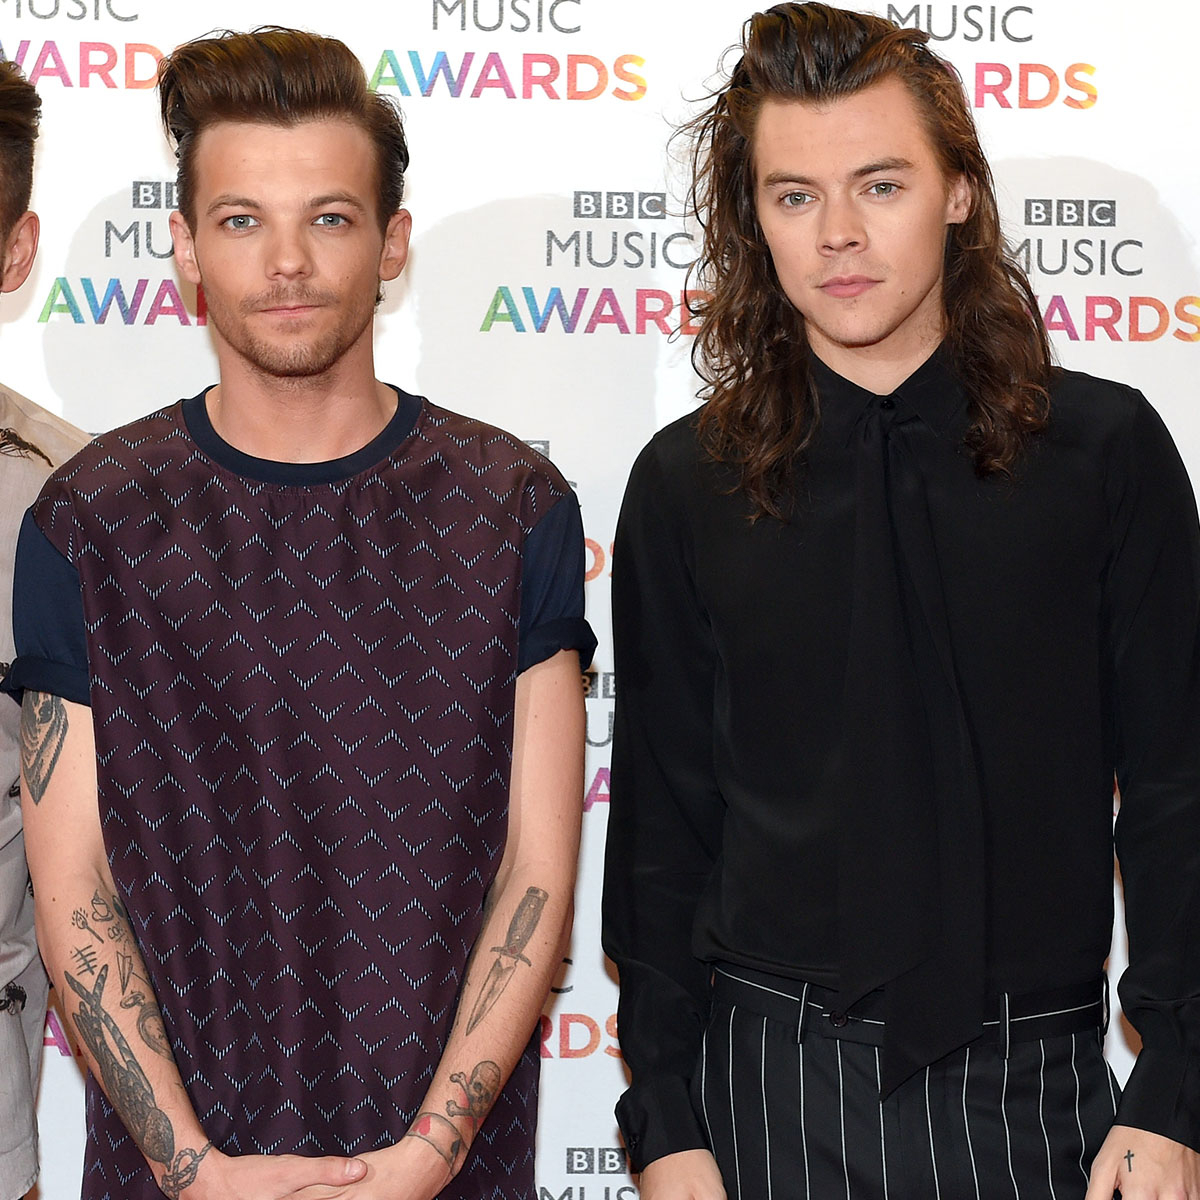 Louis Tomlinson Reveals Why Harry Styles' Solo Success Bothered Him